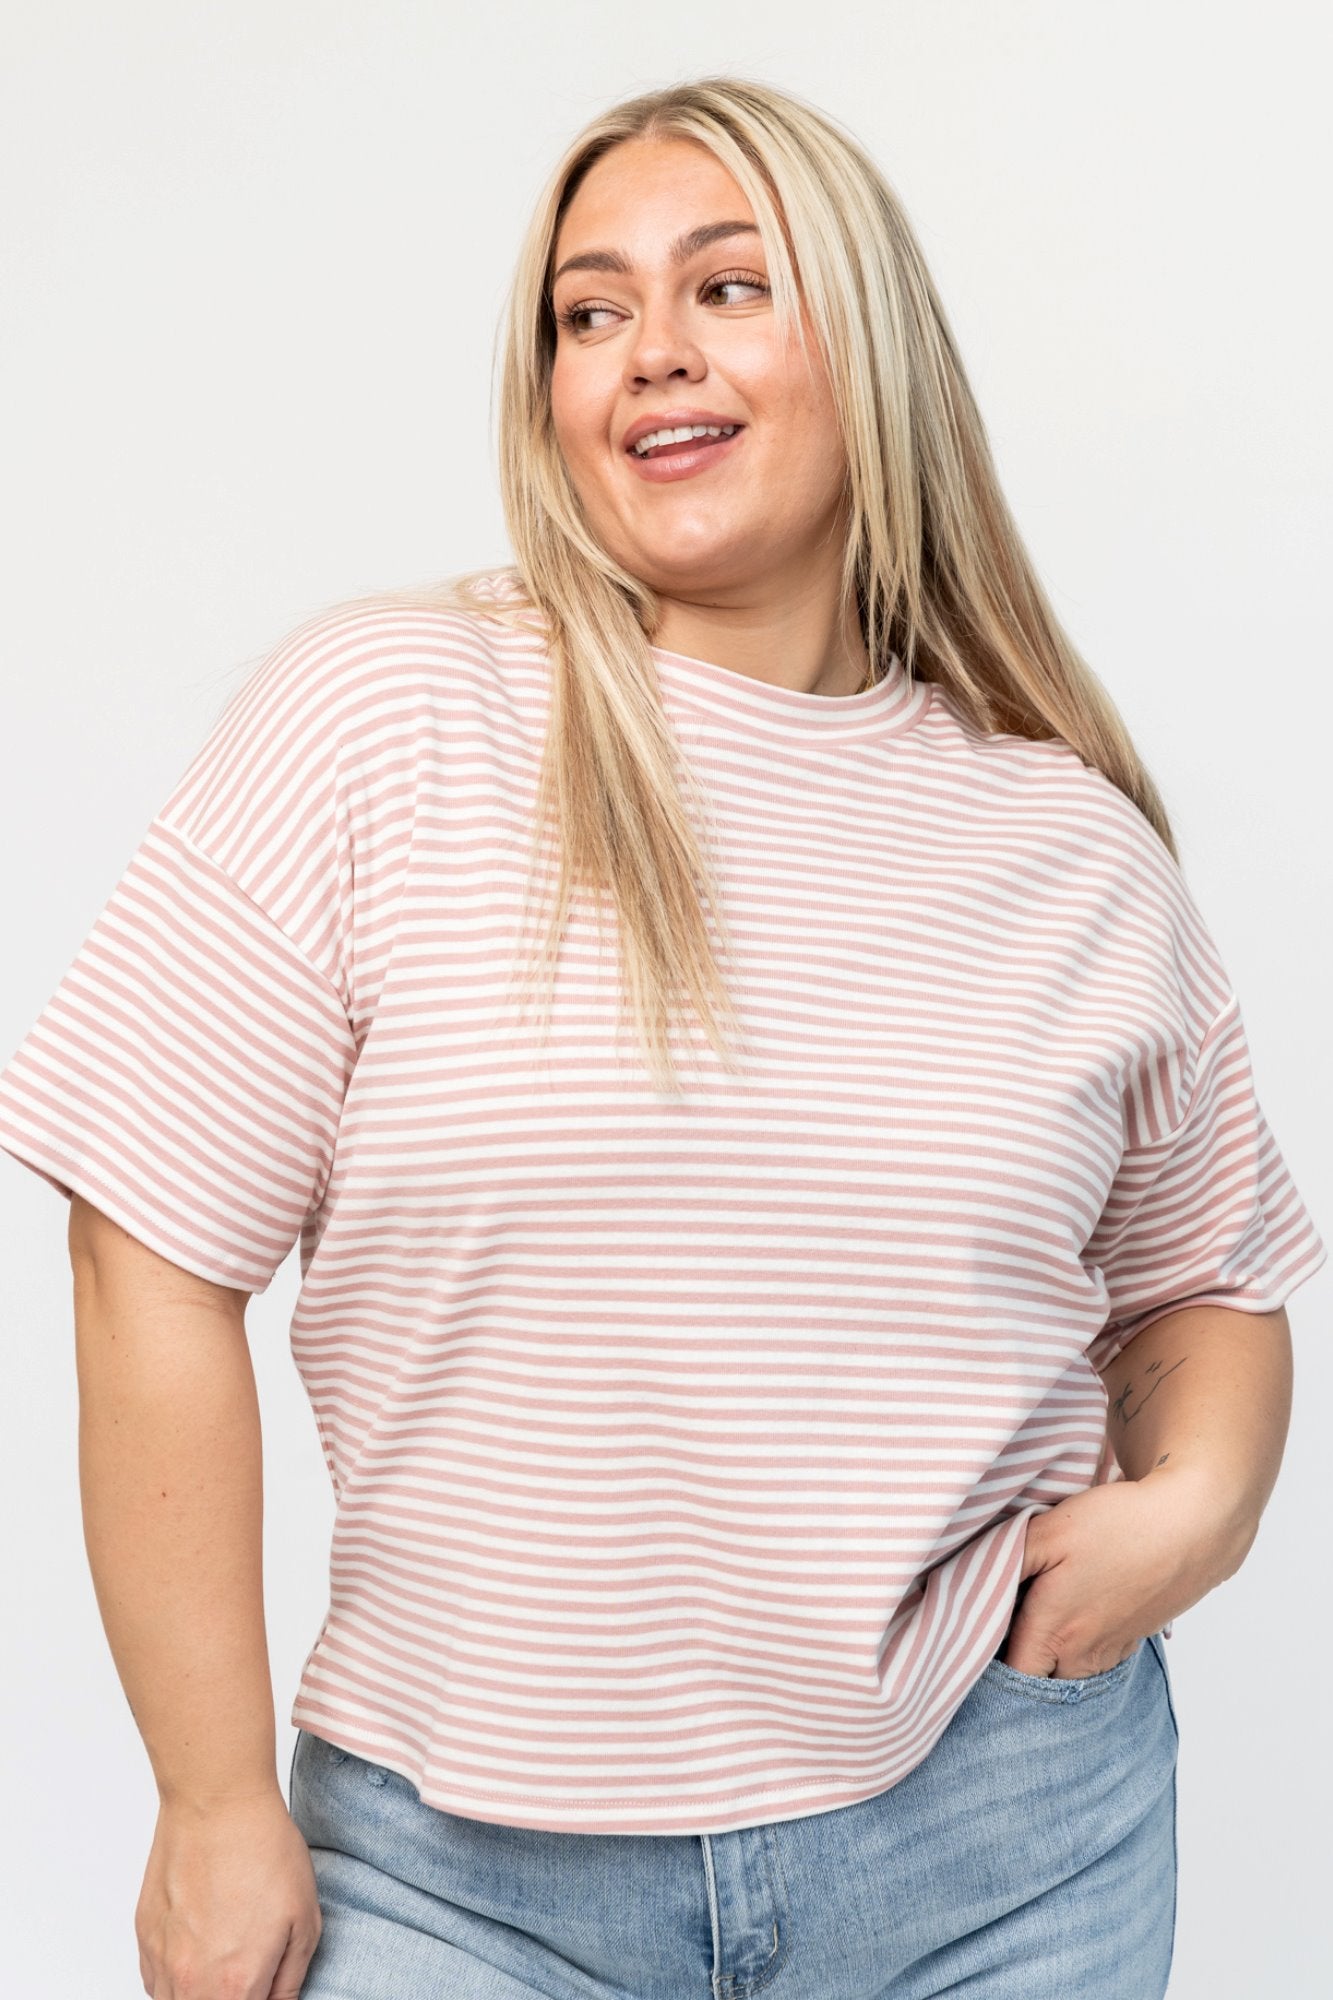 HOLLEY GIRL - Bliss Tee in Blush (Small-3XL) Holley Girl 